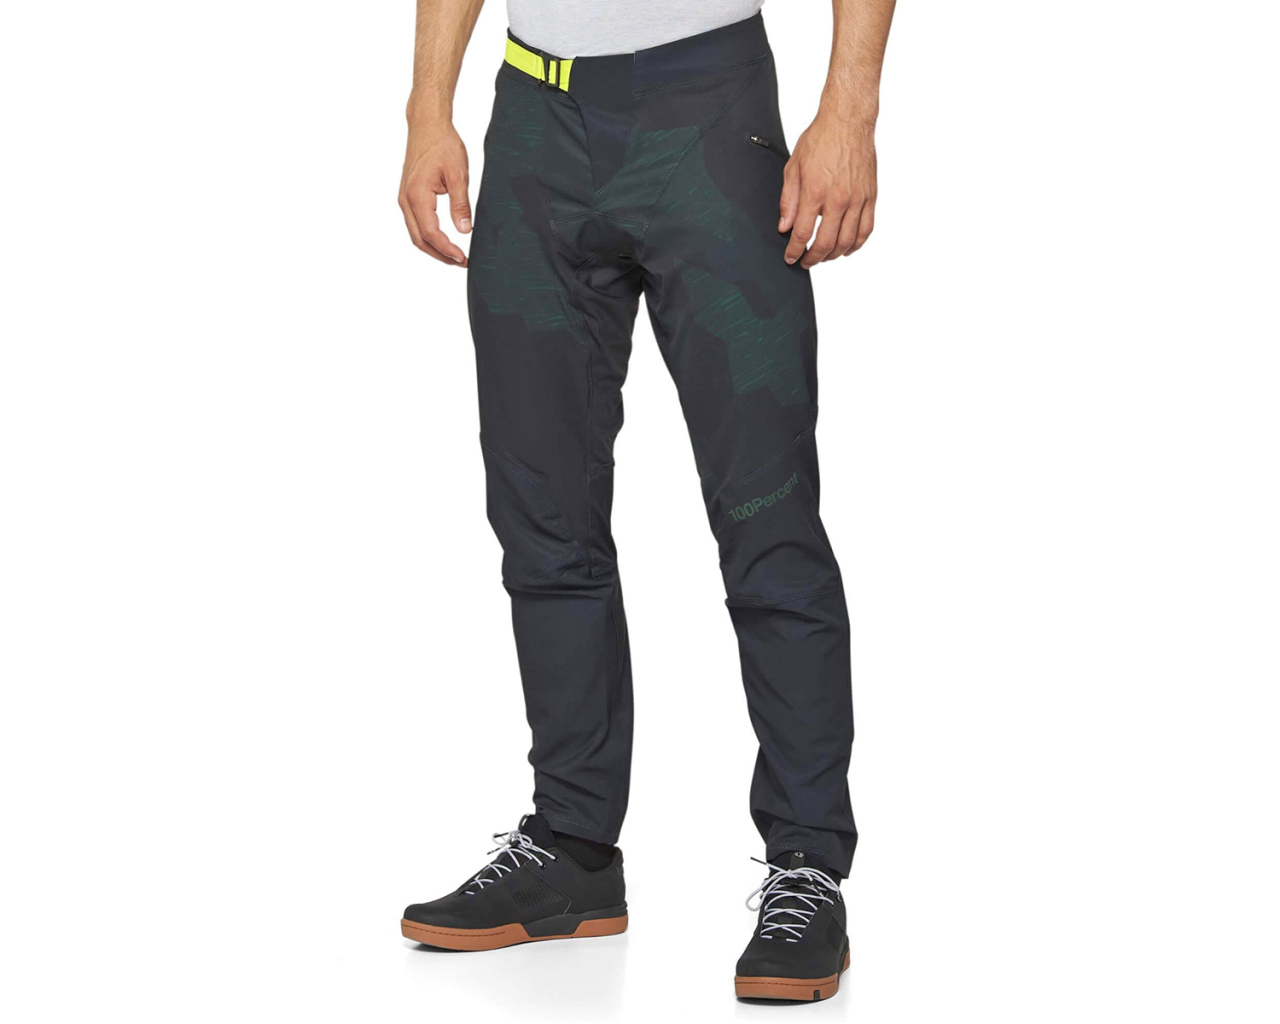 100% Airmatic Limited Edition MTB Pants | Merlin Cycles